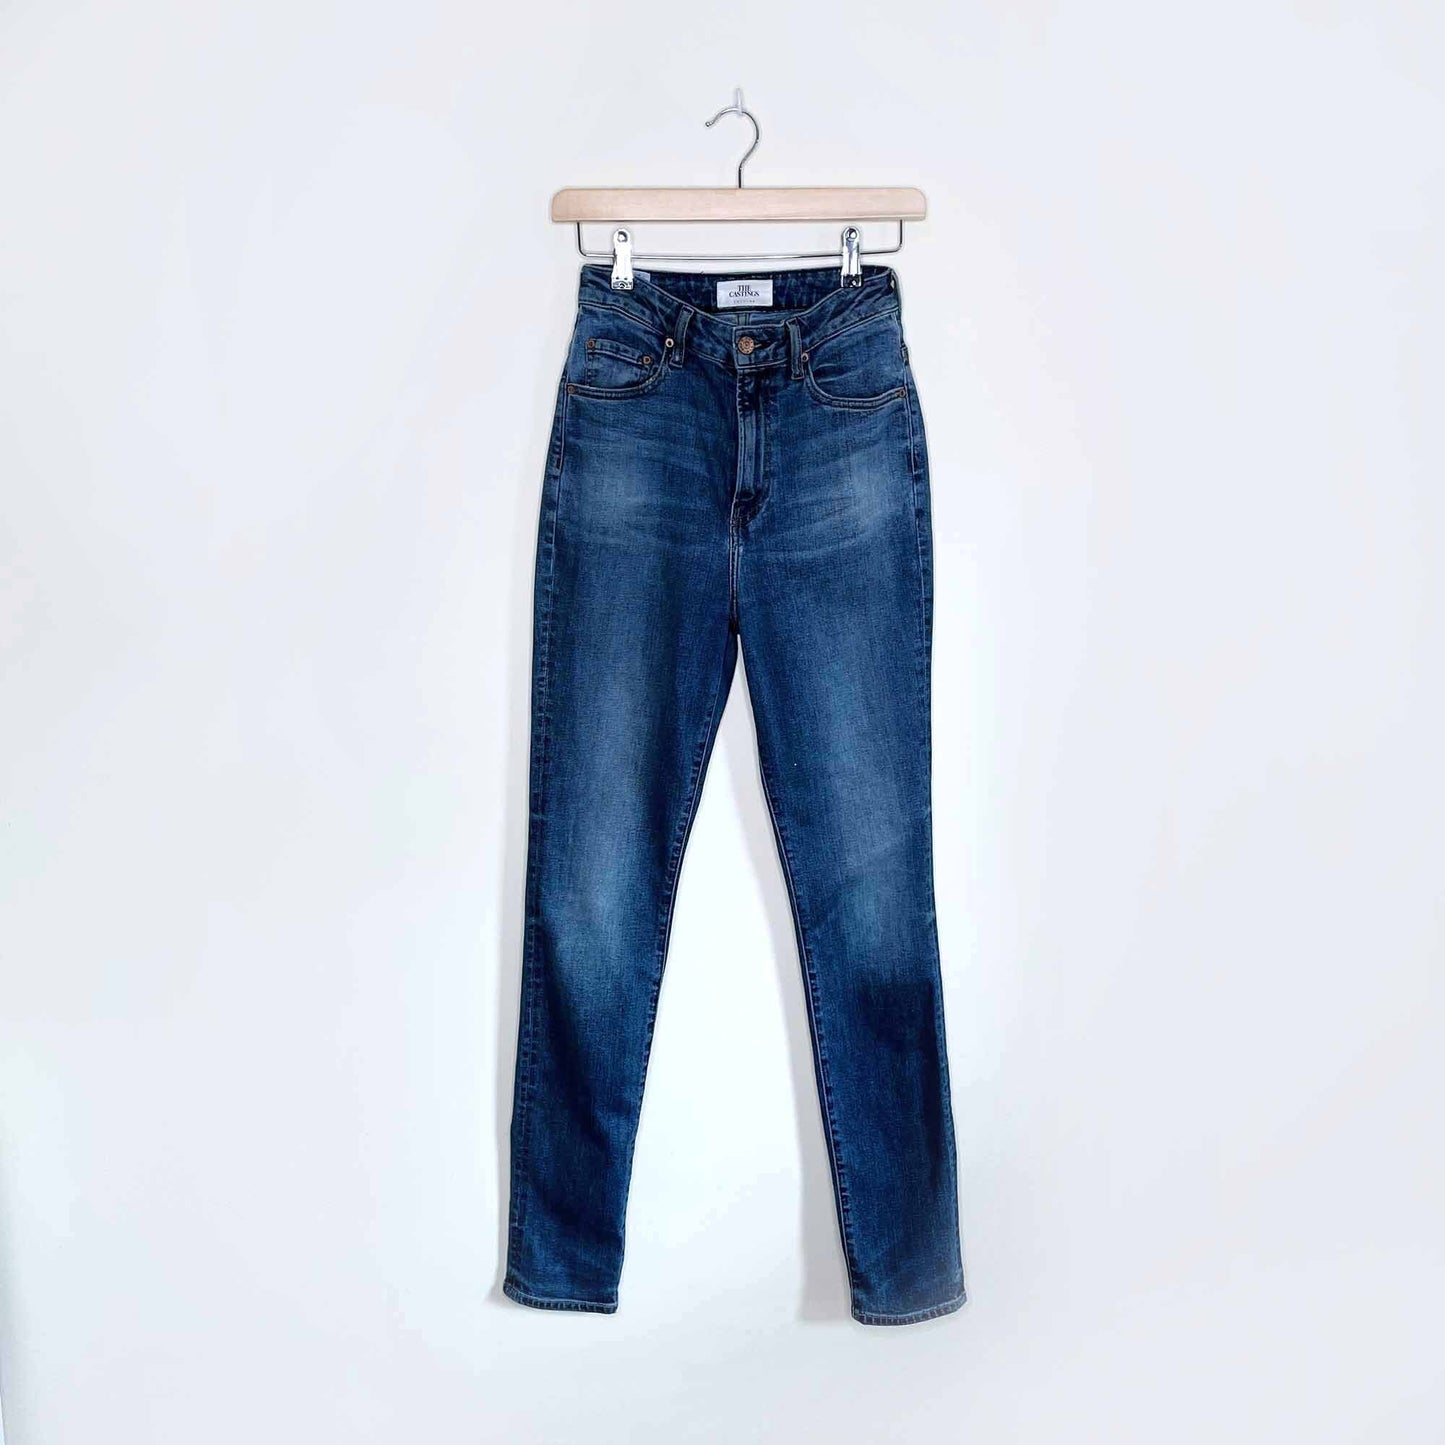 the castings super high rise skinny jeans - size 26